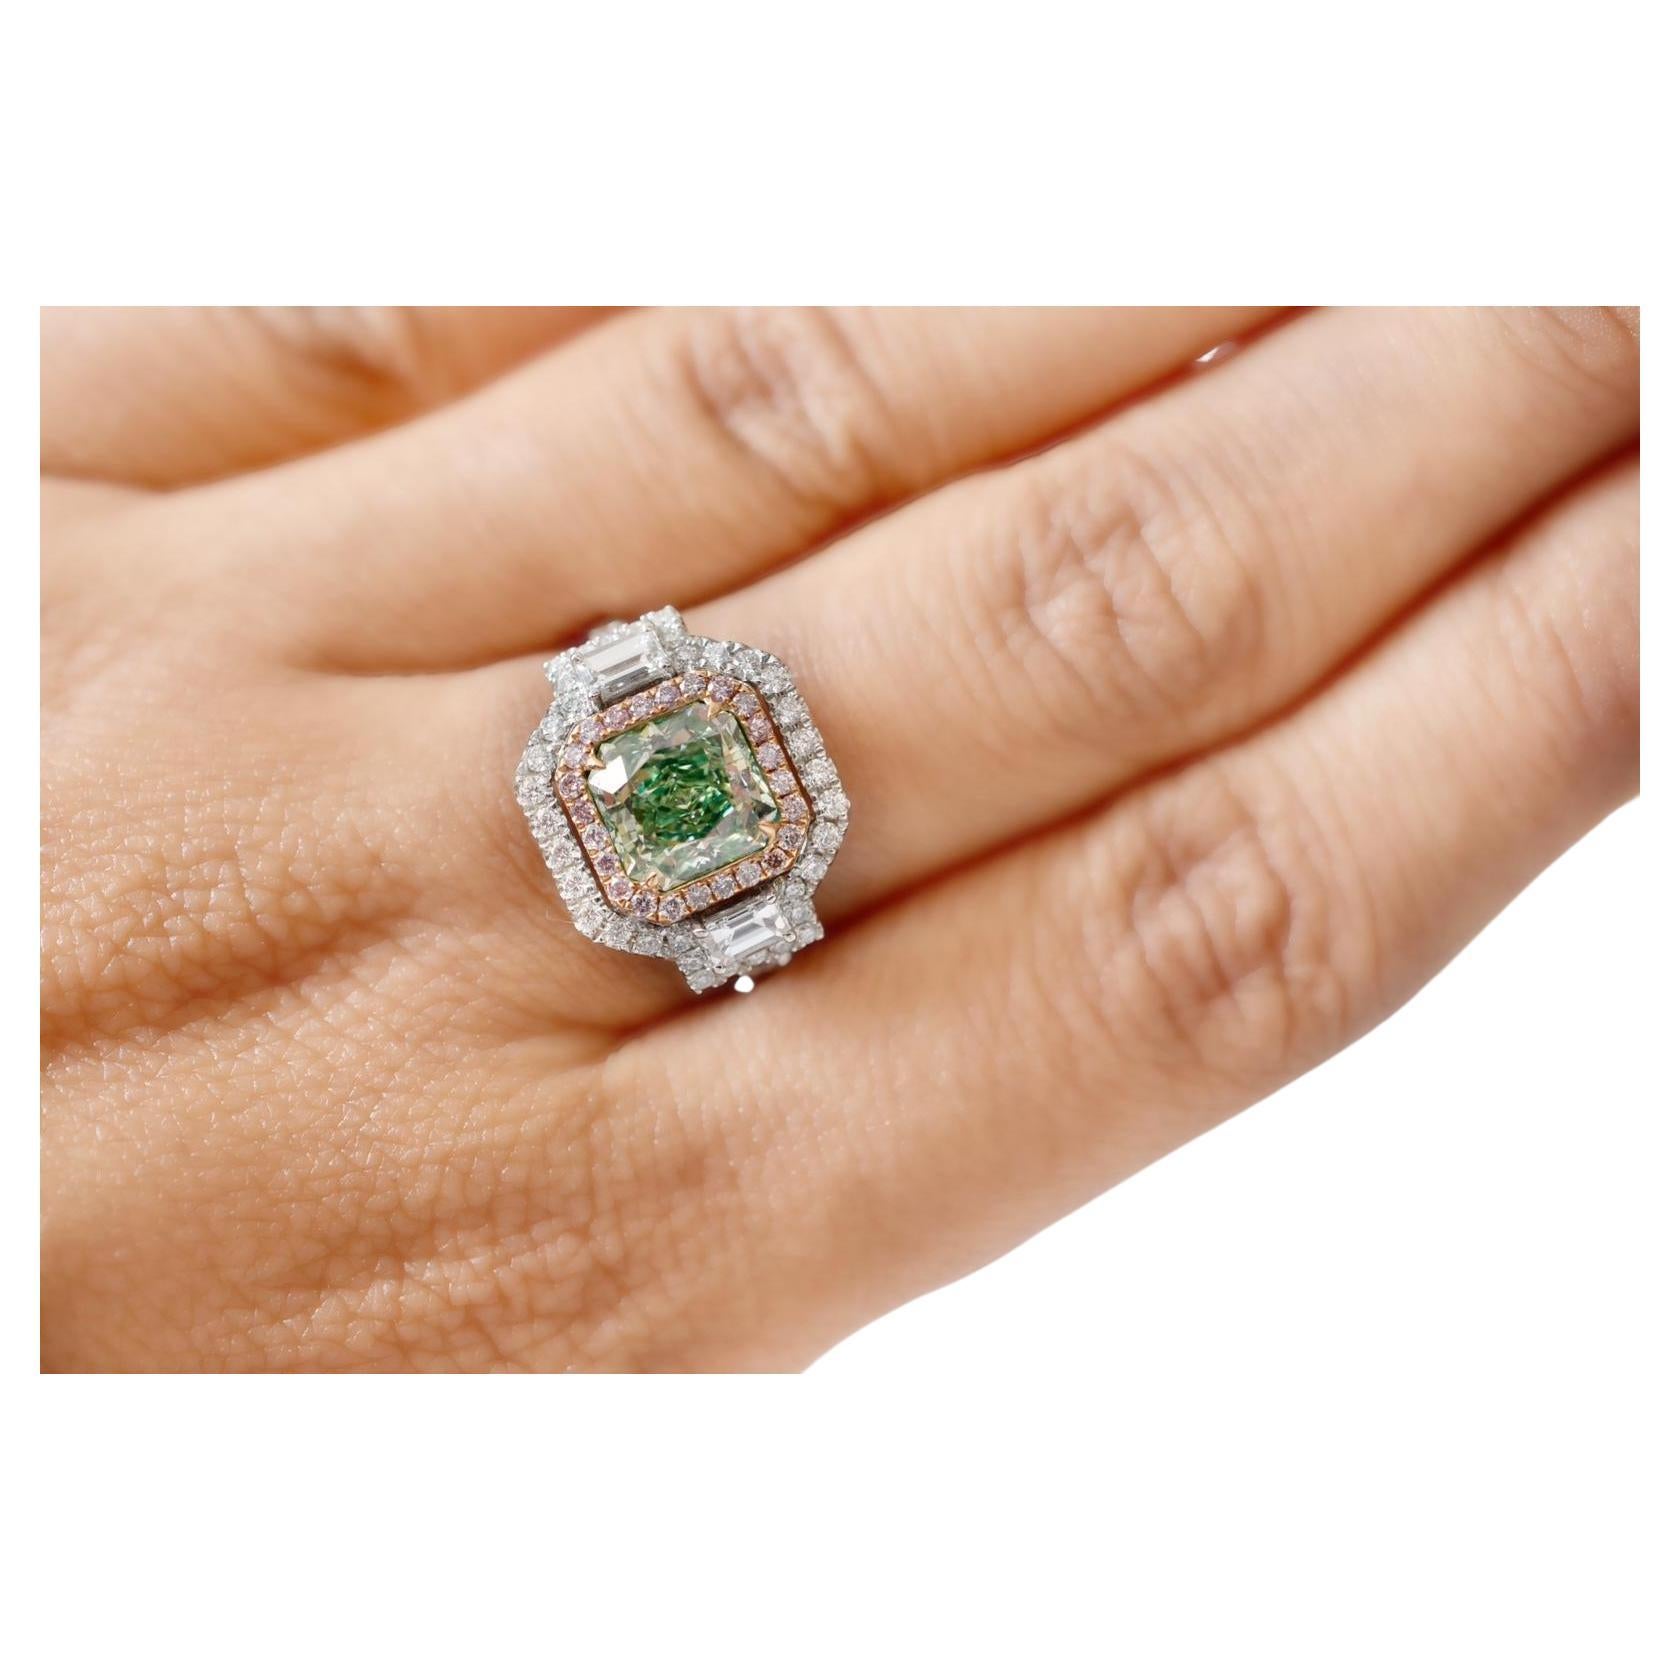 GIA Certified 2.16 Carat Fancy Yellow Green Diamond Ring SI2 Clarity For Sale